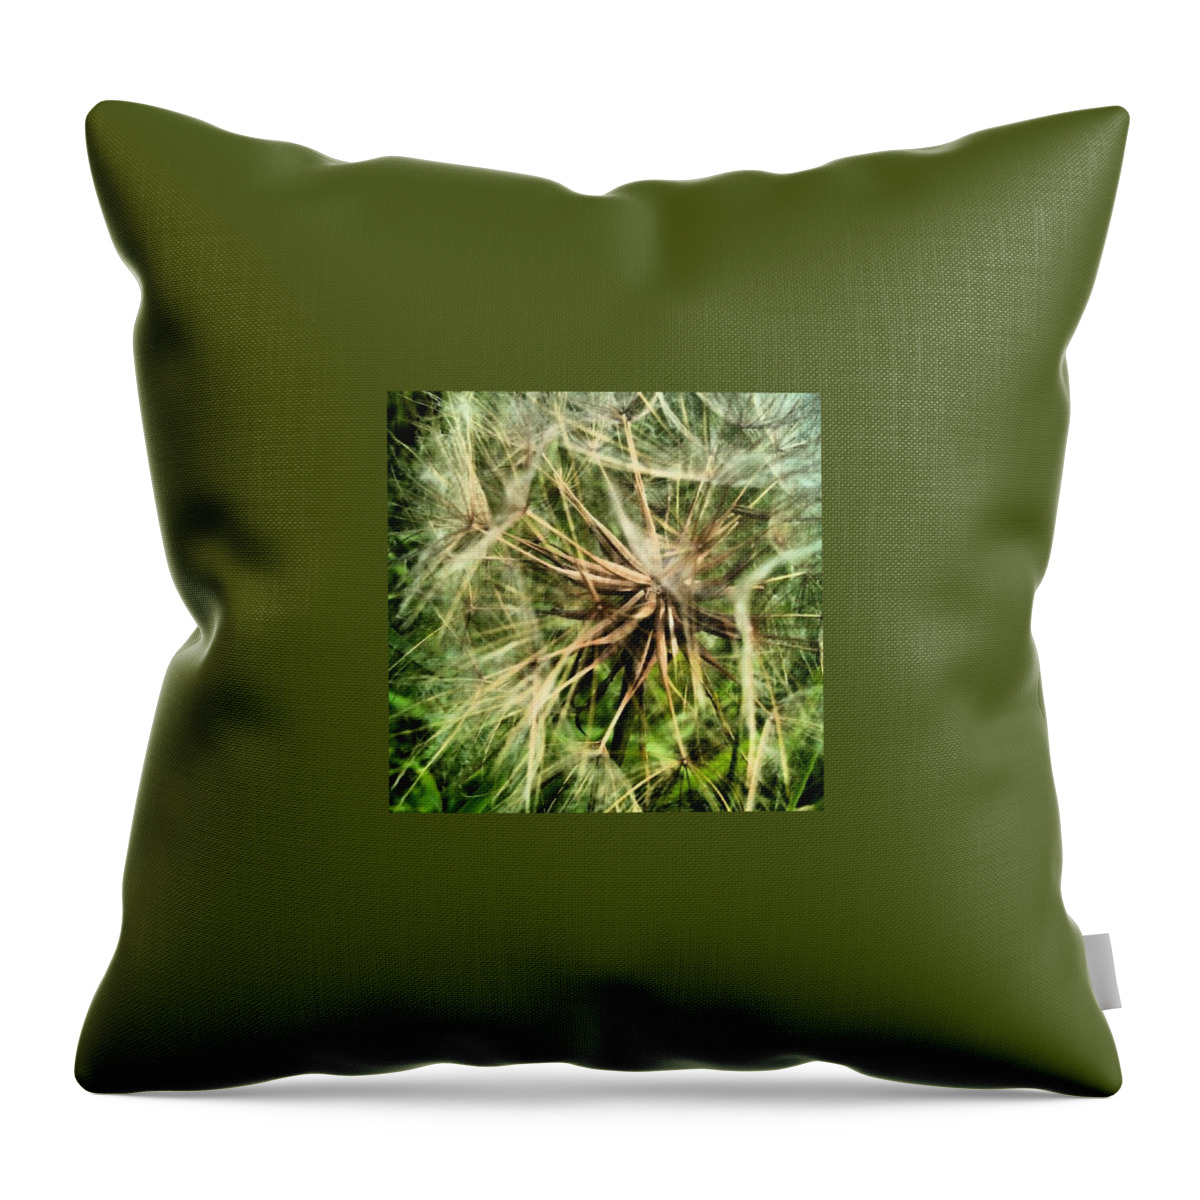 Dandelion Throw Pillow featuring the photograph Dandelion #1 by Vicki Field